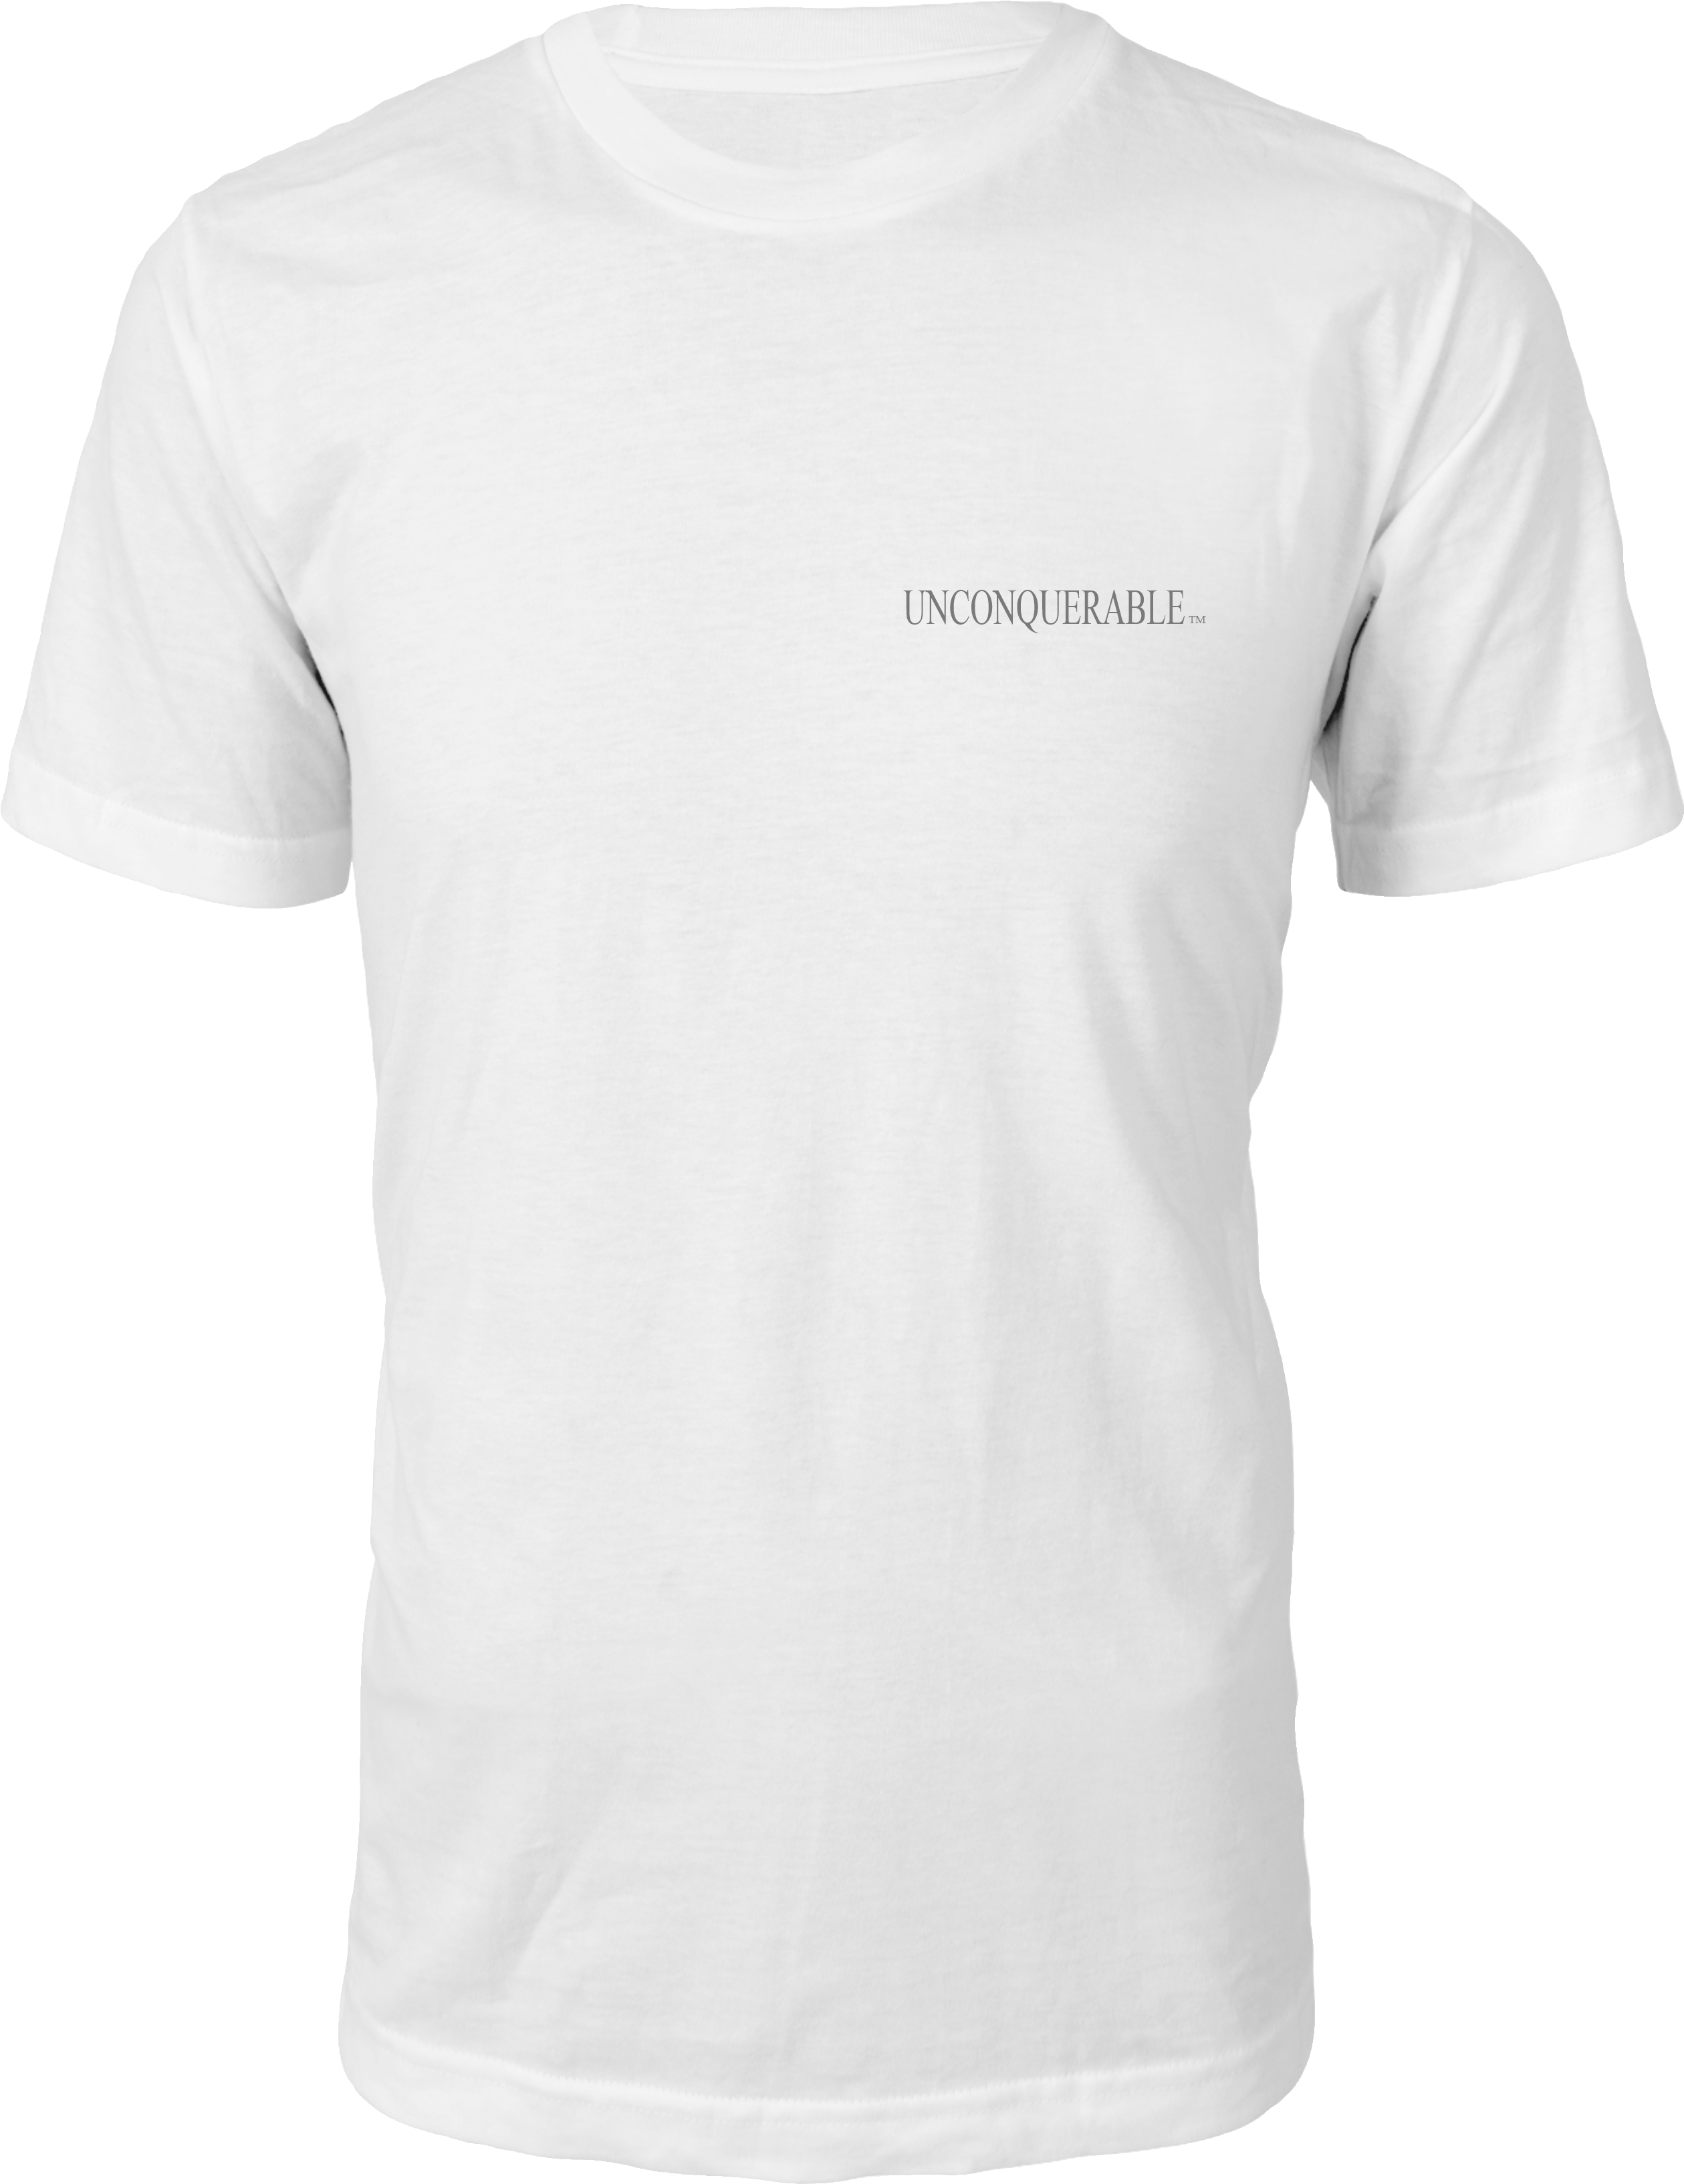 Free White T Shirt Png, Download Free White T Shirt Png png images ...